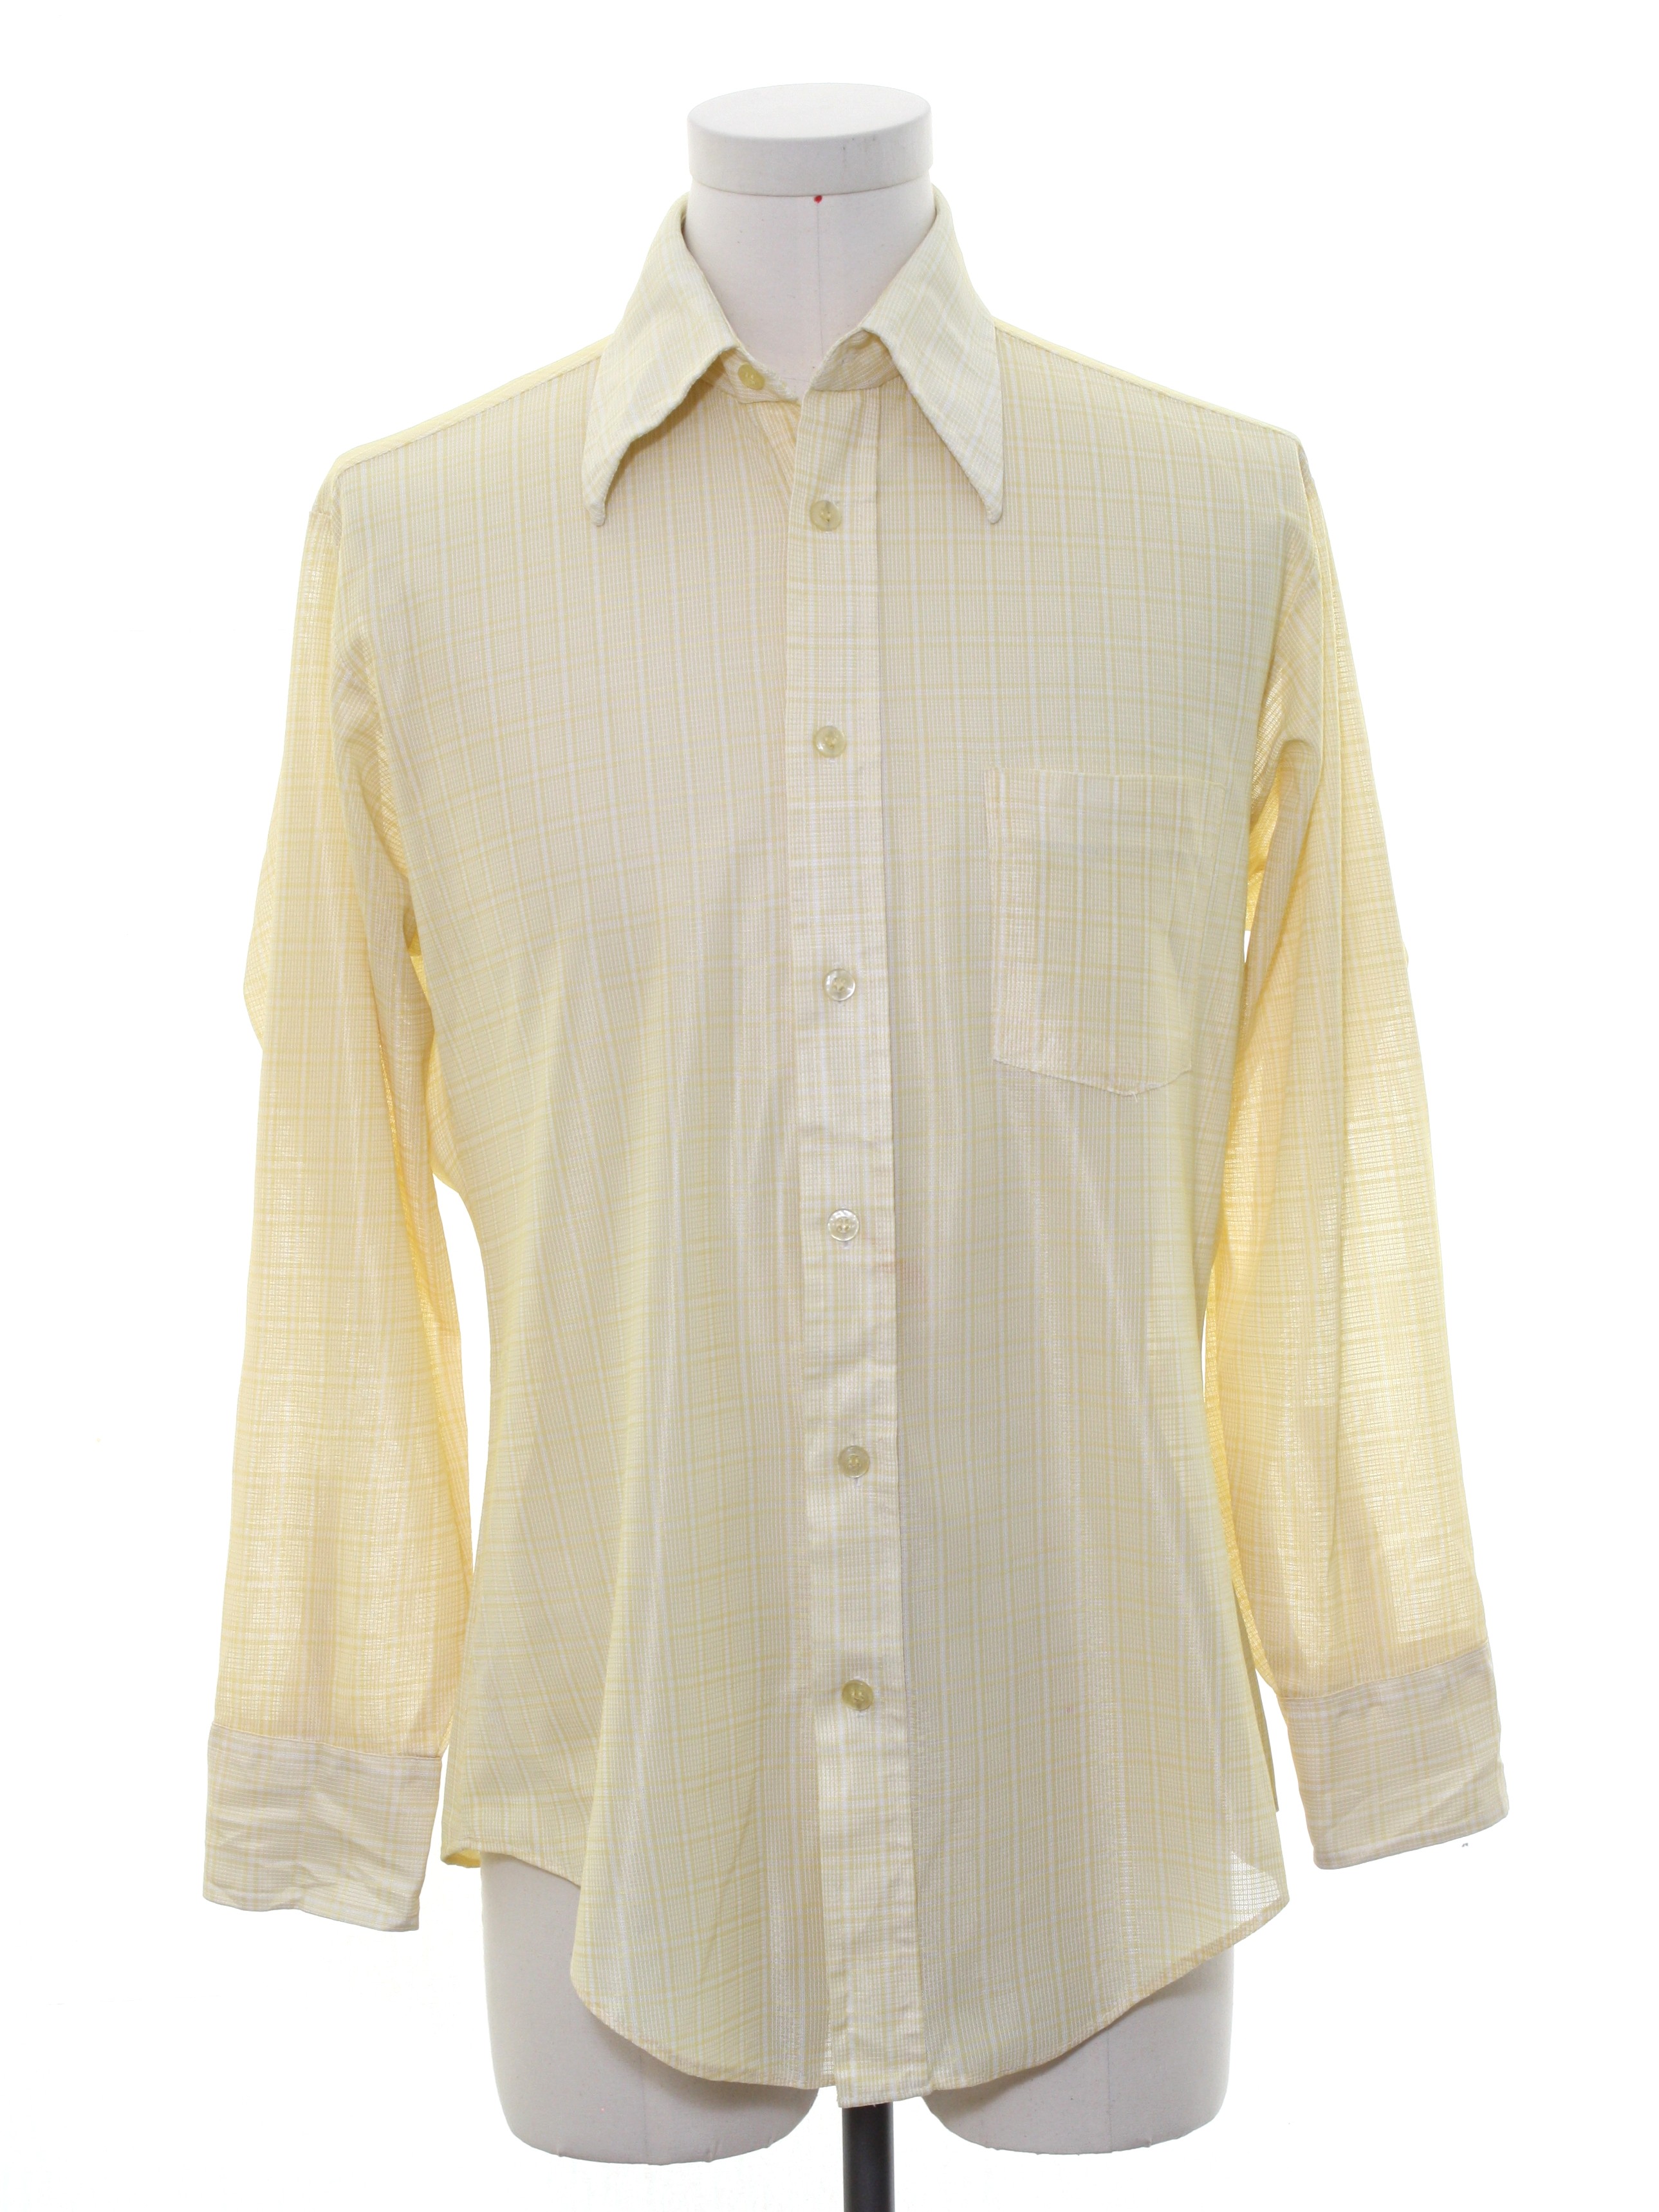 1970's Print Disco Shirt (Sears): Early 70s -Sears- Mens gold and white ...